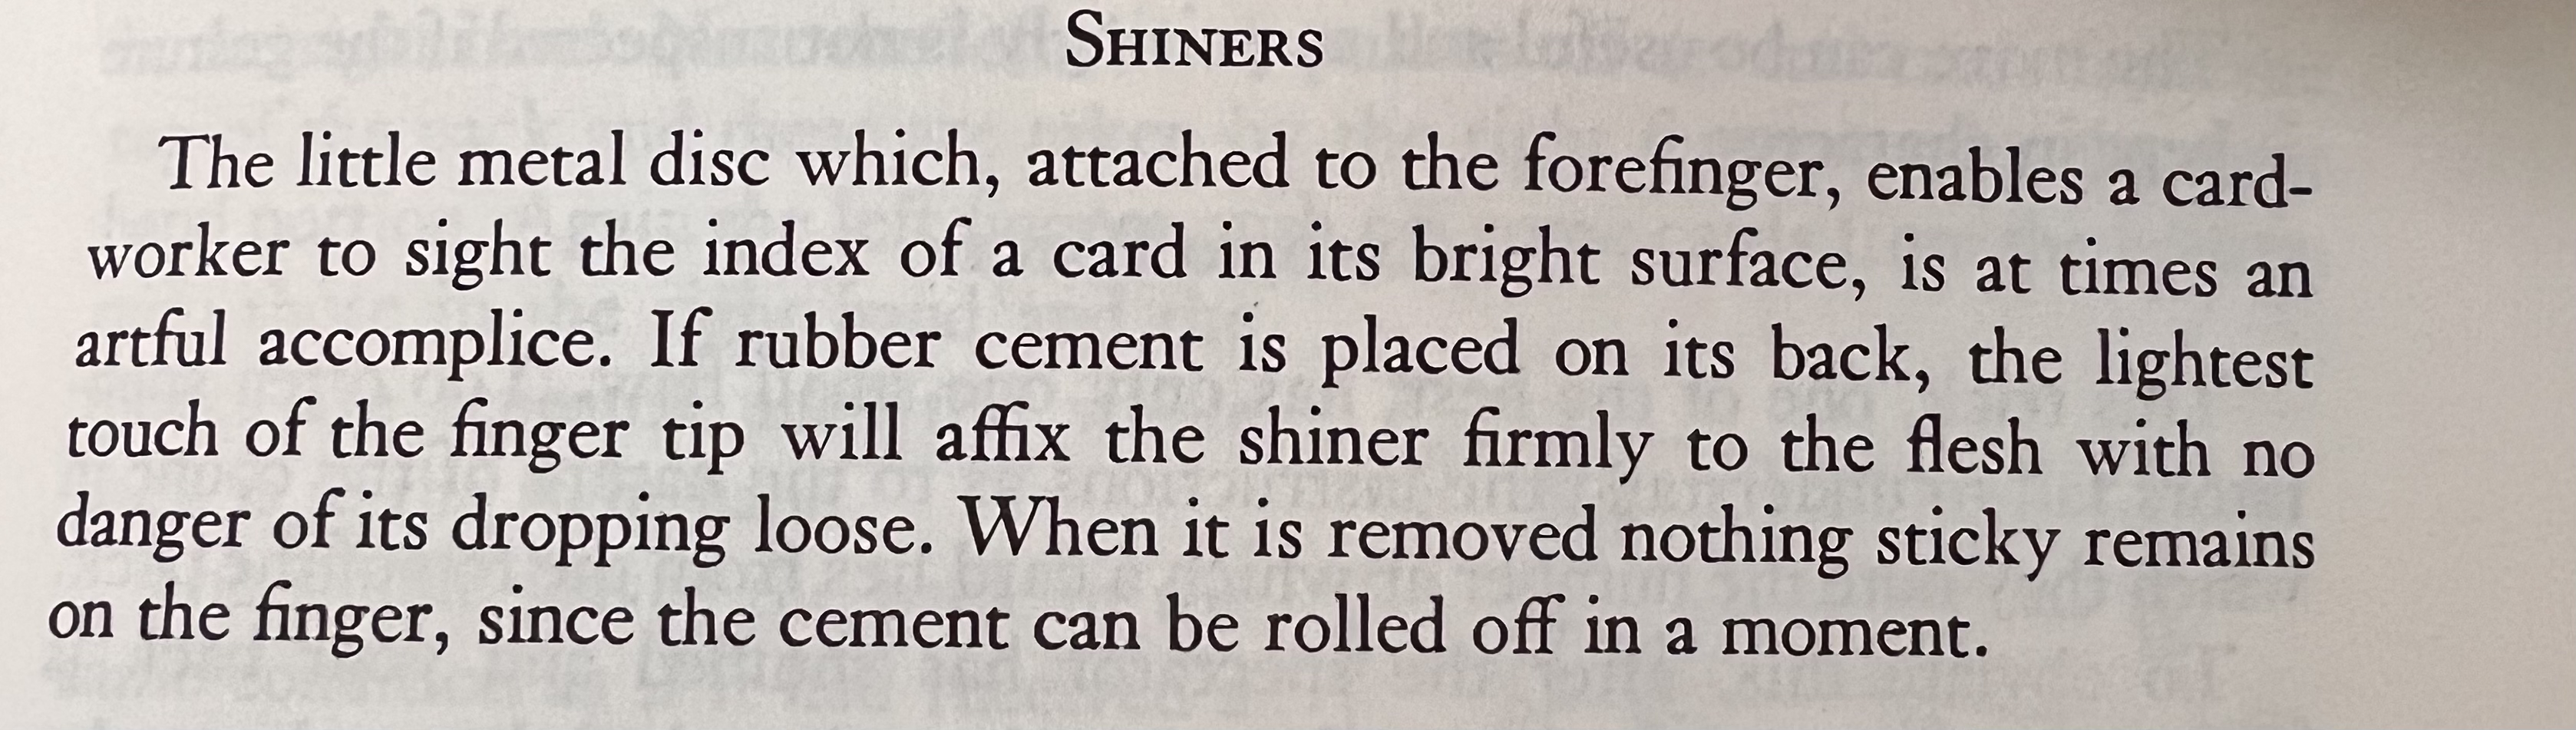 Photo from a book on card cheating. "SHINERS The little metal disc which, attached to the forefinger, enables a card- worker to sight the index of a card in its bright surface, is at times an artful accomplice. If rubber cement is placed on its back, the lightest touch of the finger tip will affix the shiner firmly to the flesh with no danger of its dropping loose. When it is removed nothing sticky remains on the finger, since the cement can be rolled off in a moment."